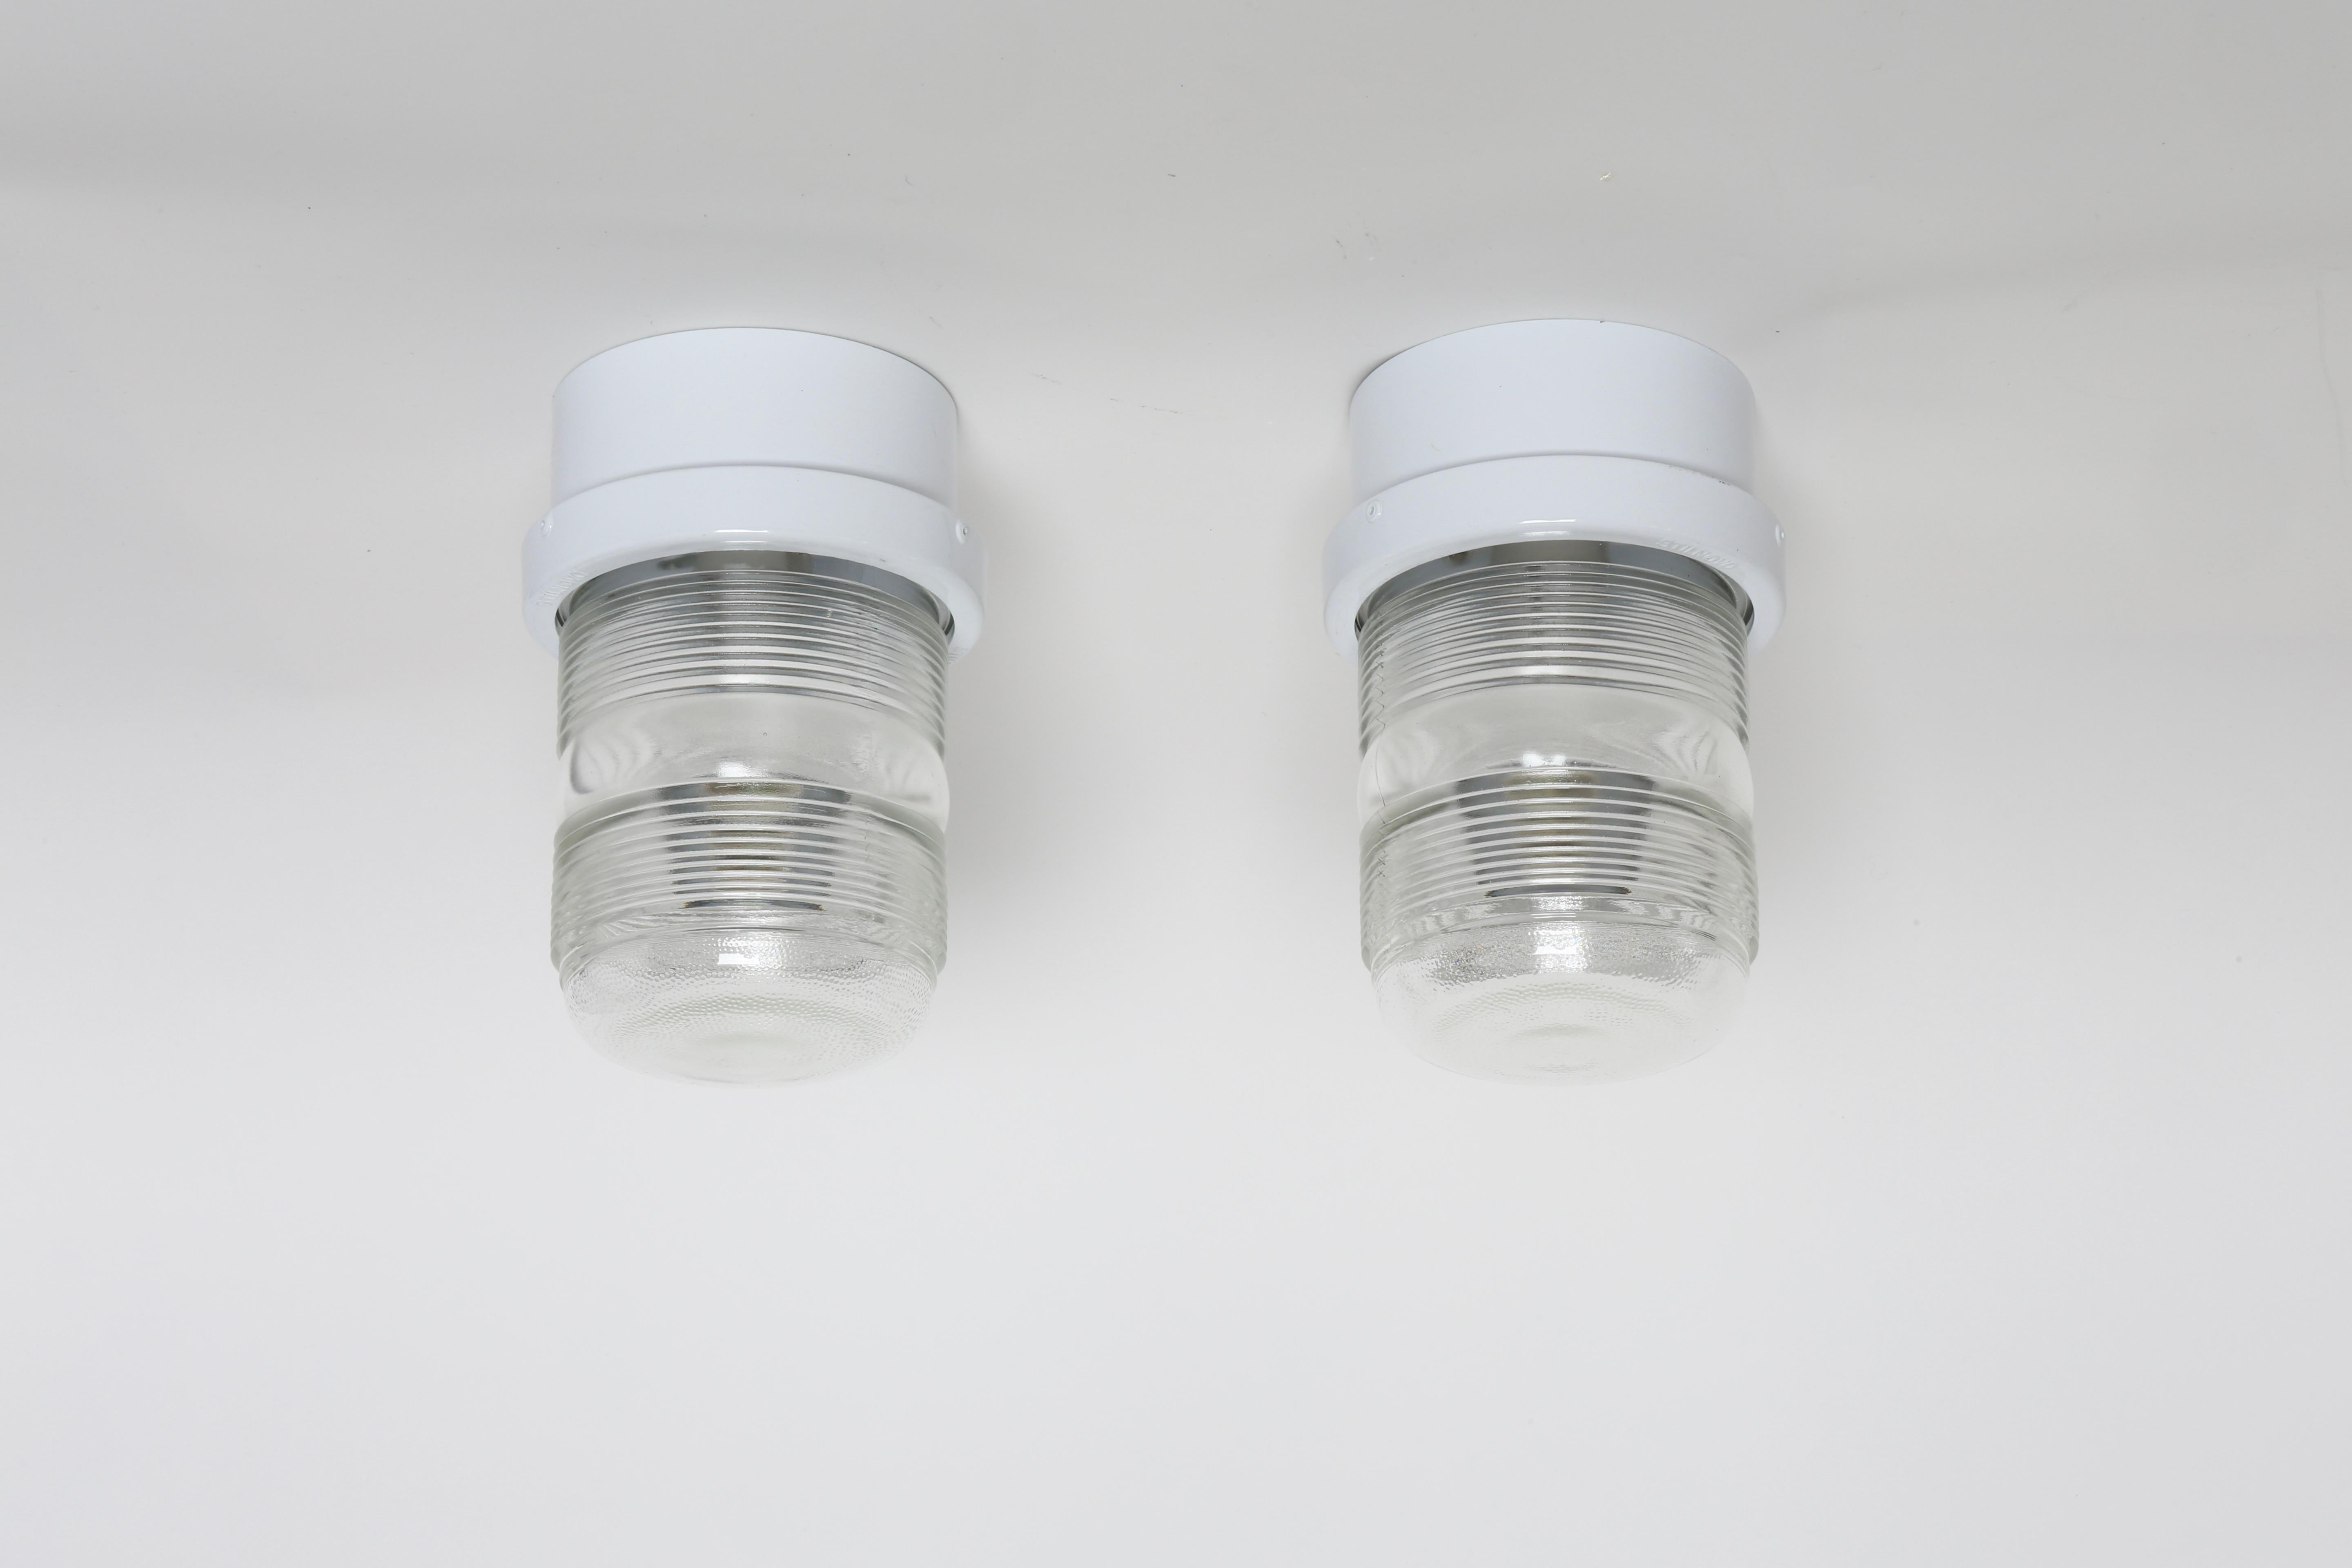 Stilnovo Ceiling or Wall Lights, Set of 4 In Good Condition For Sale In Brooklyn, NY